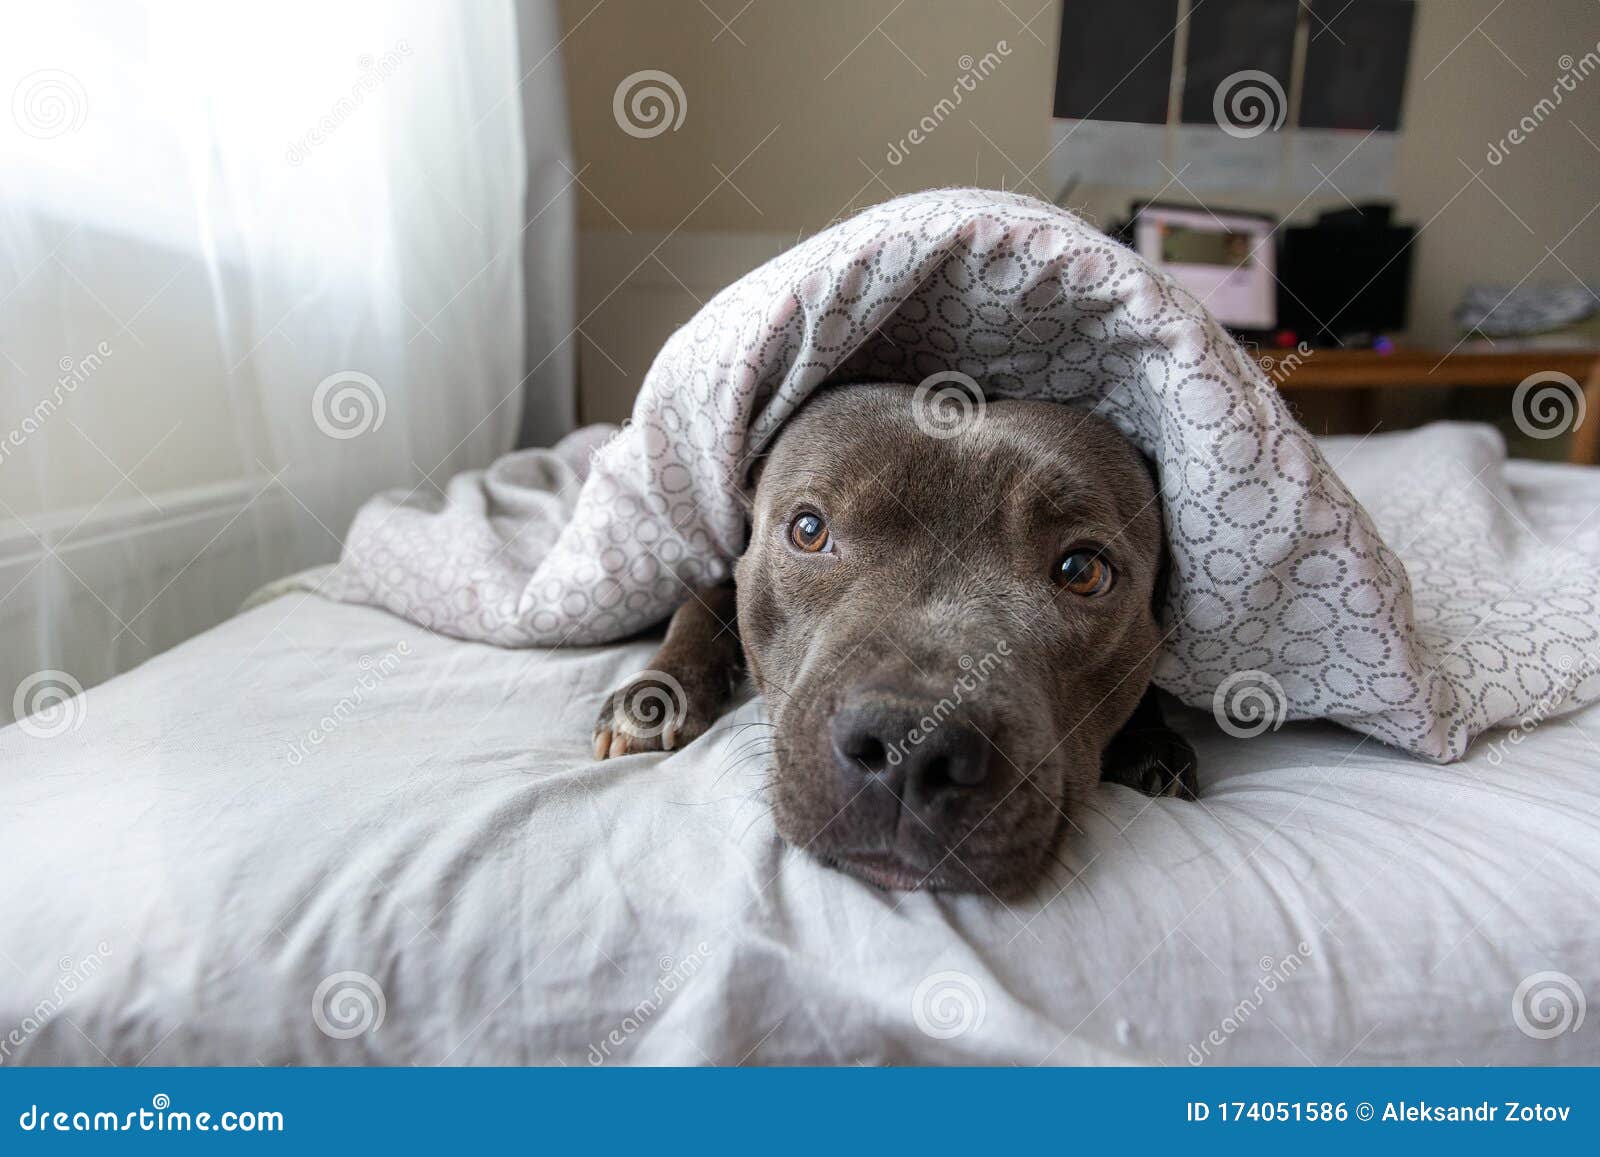 Focused Young Dog Lying Under Blanket On Bed Stock Photo Image Of Calm Doggy 174051586